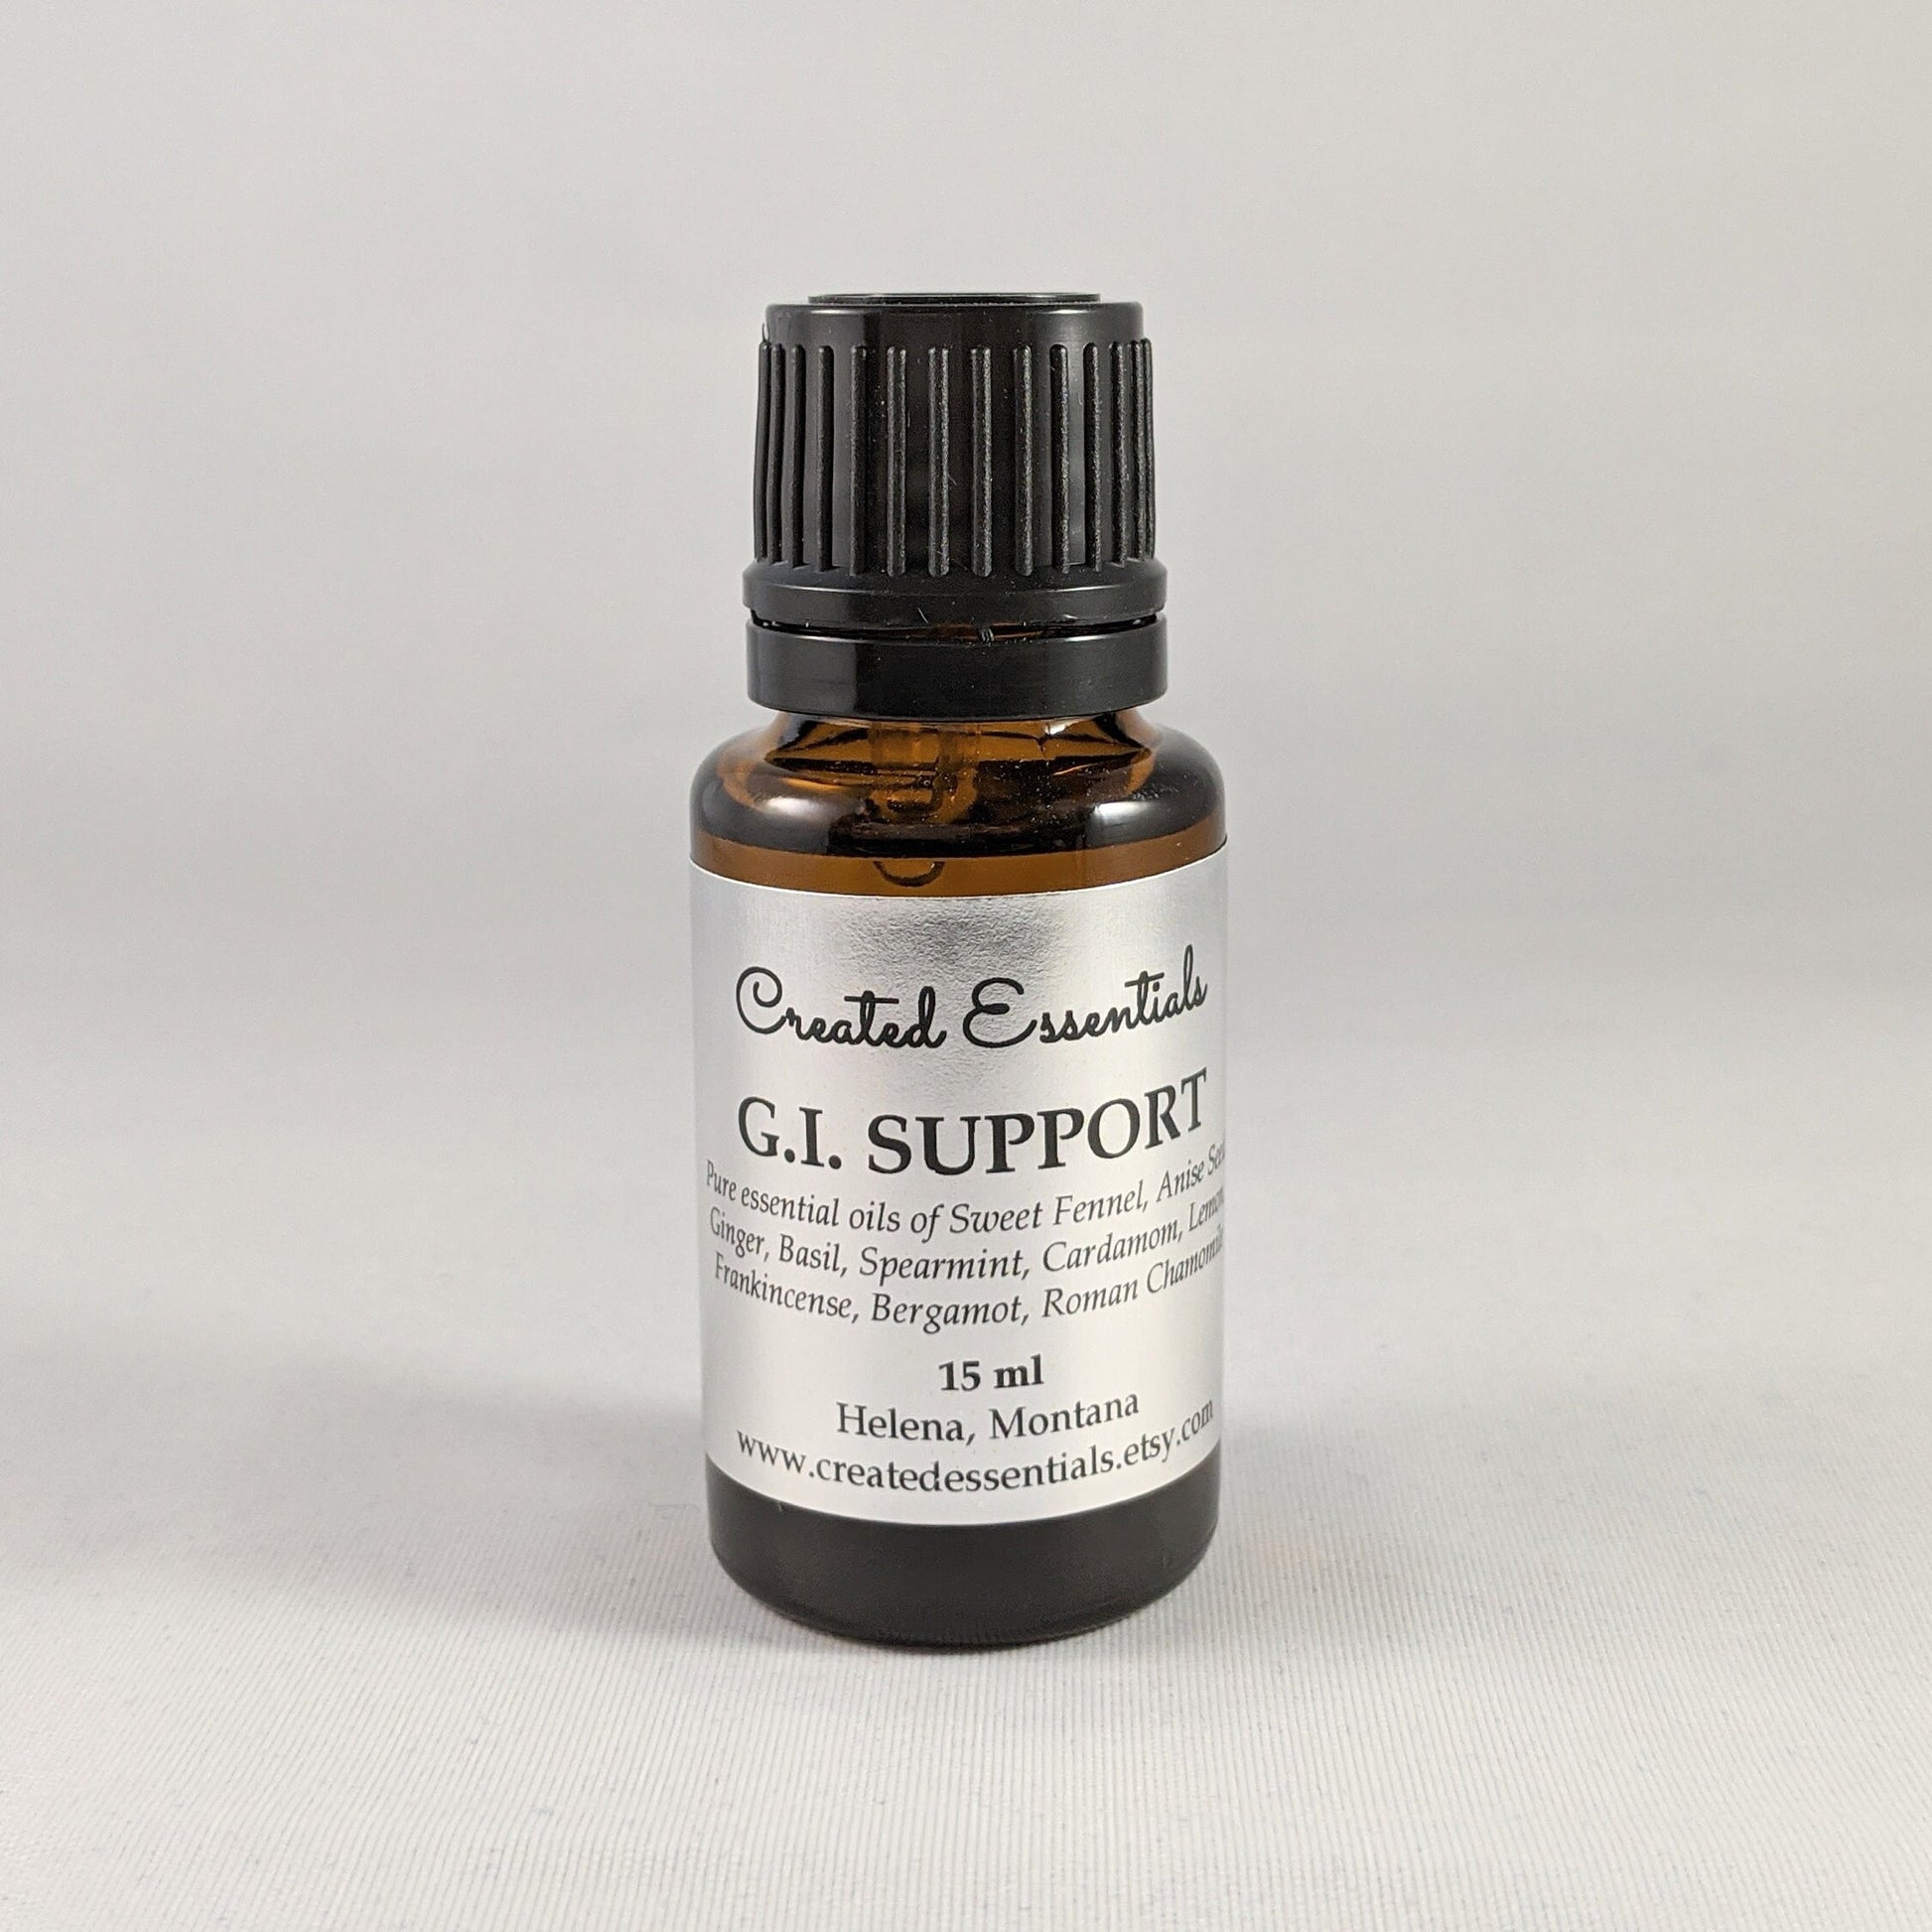 G.I. Support Essential Oil Blend | Pure Undiluted Essential Oil Blend | Pure Essential Oil Blend